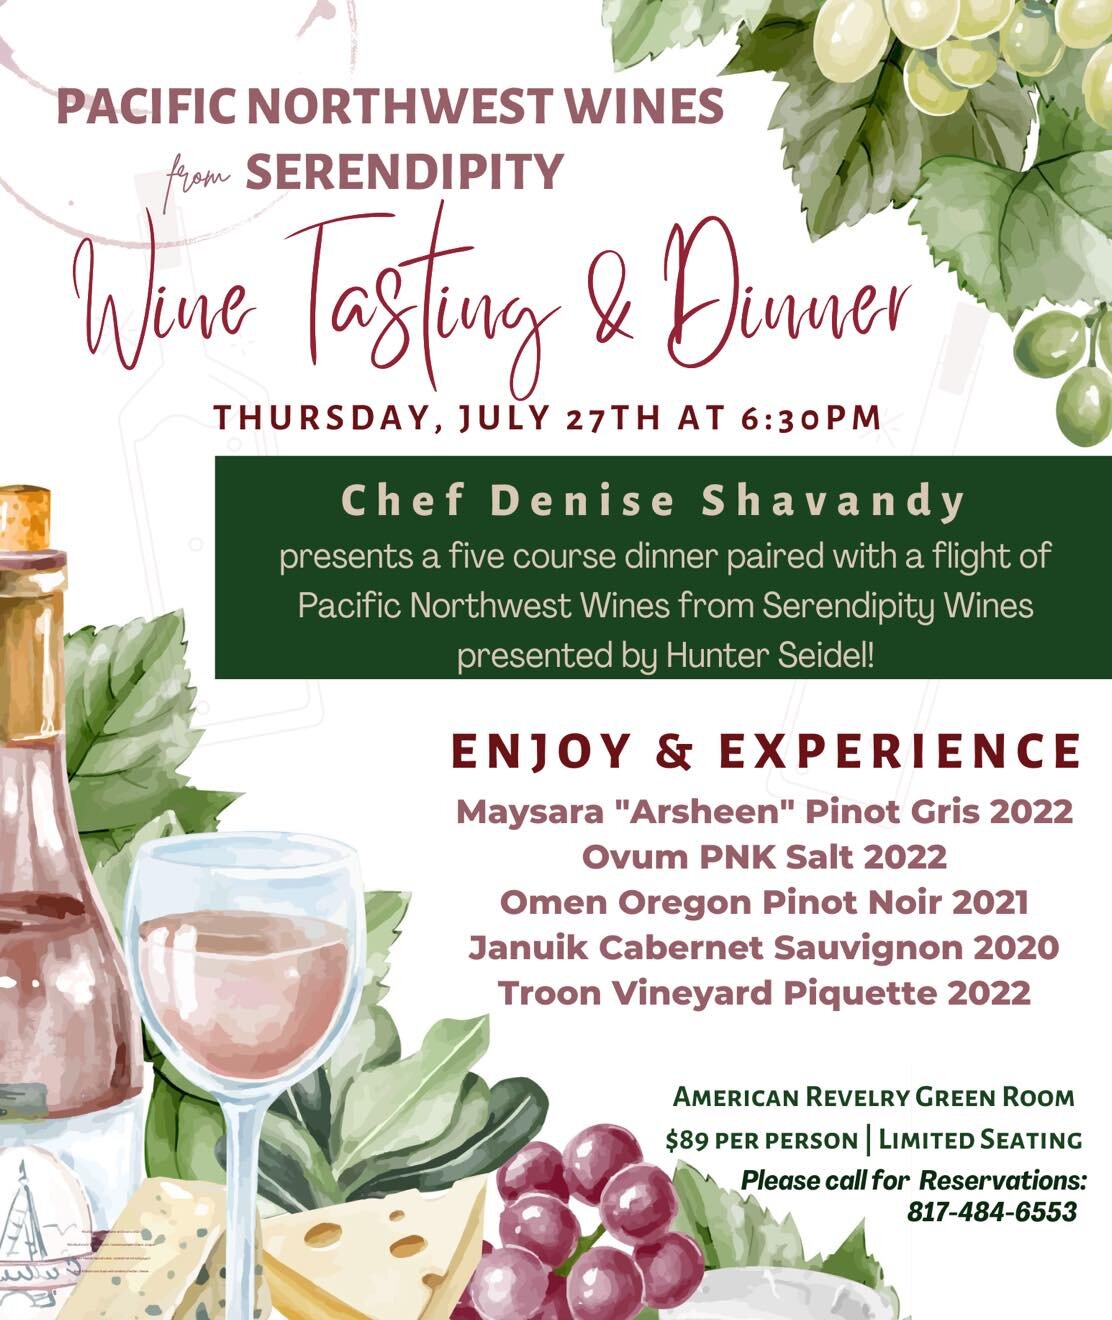 Join us for our next Wine Tasting &amp; Dinner next Thursday, July 27th at 6:30pm!!

🍷 Featuring Pacific Northwest Wines from Serendipity 

🍽️ Five course dinner paired with a tasting of the featured wines

📞 Limited Seating - please call for your